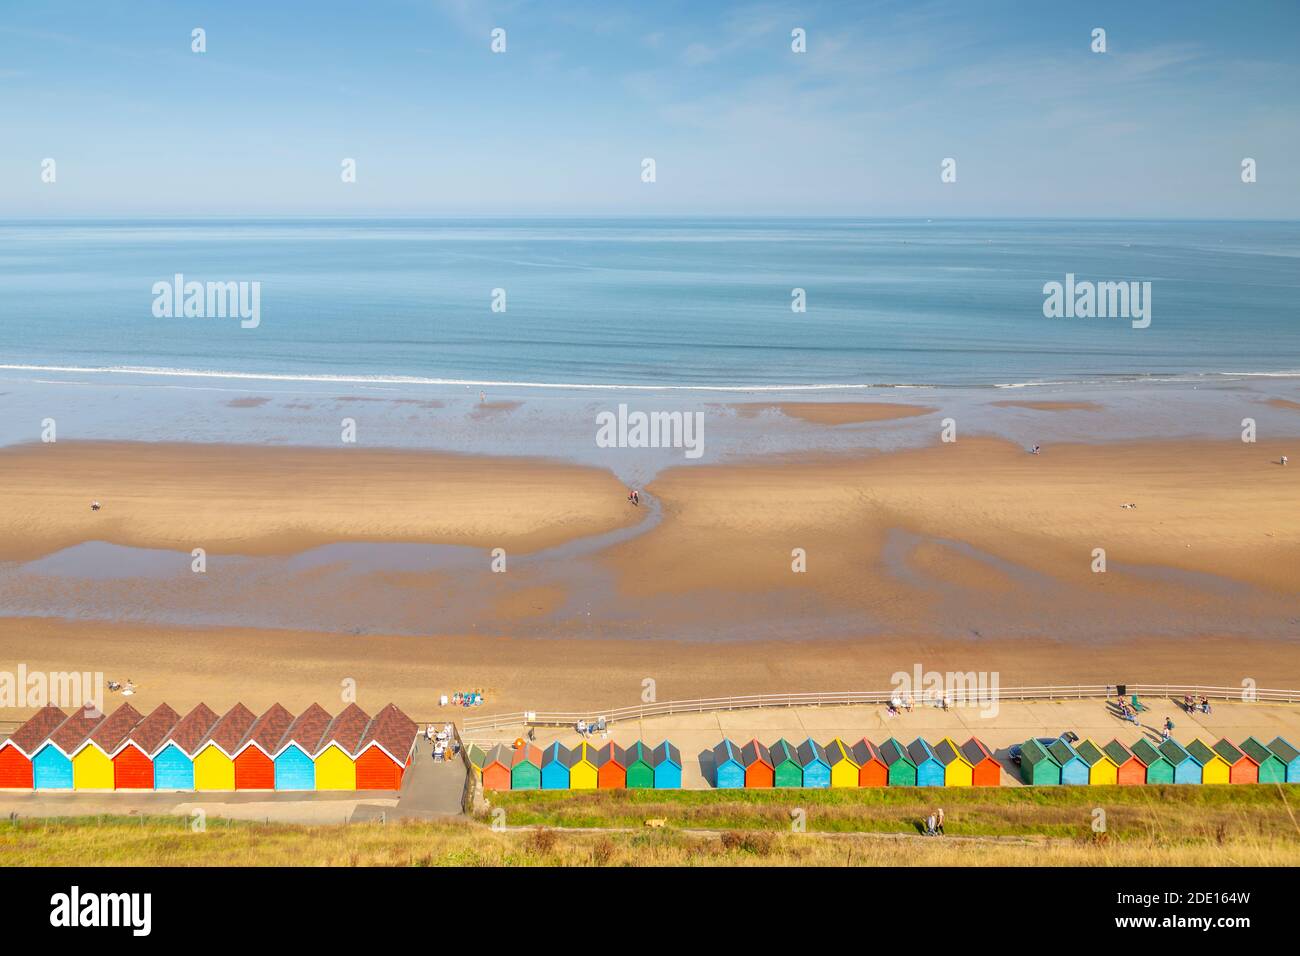 View of colourful beach huts on West Cliff Beach, Whitby, North Yorkshire, England, United Kingdom, Europe Stock Photo